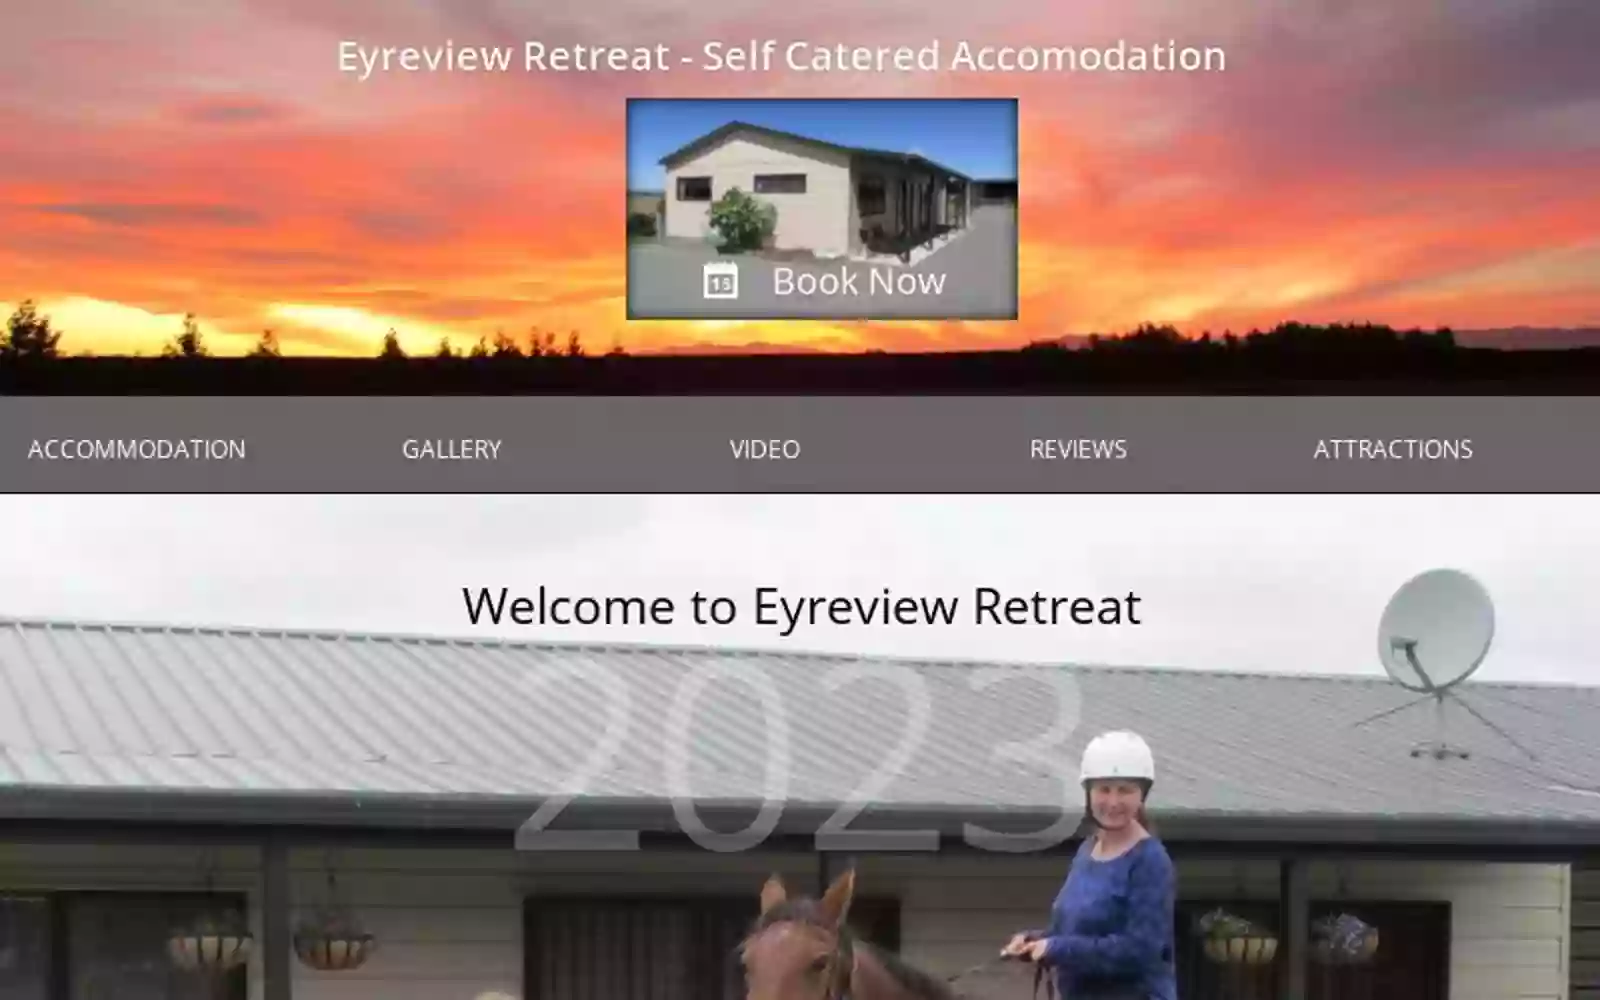 Eyreview Retreat